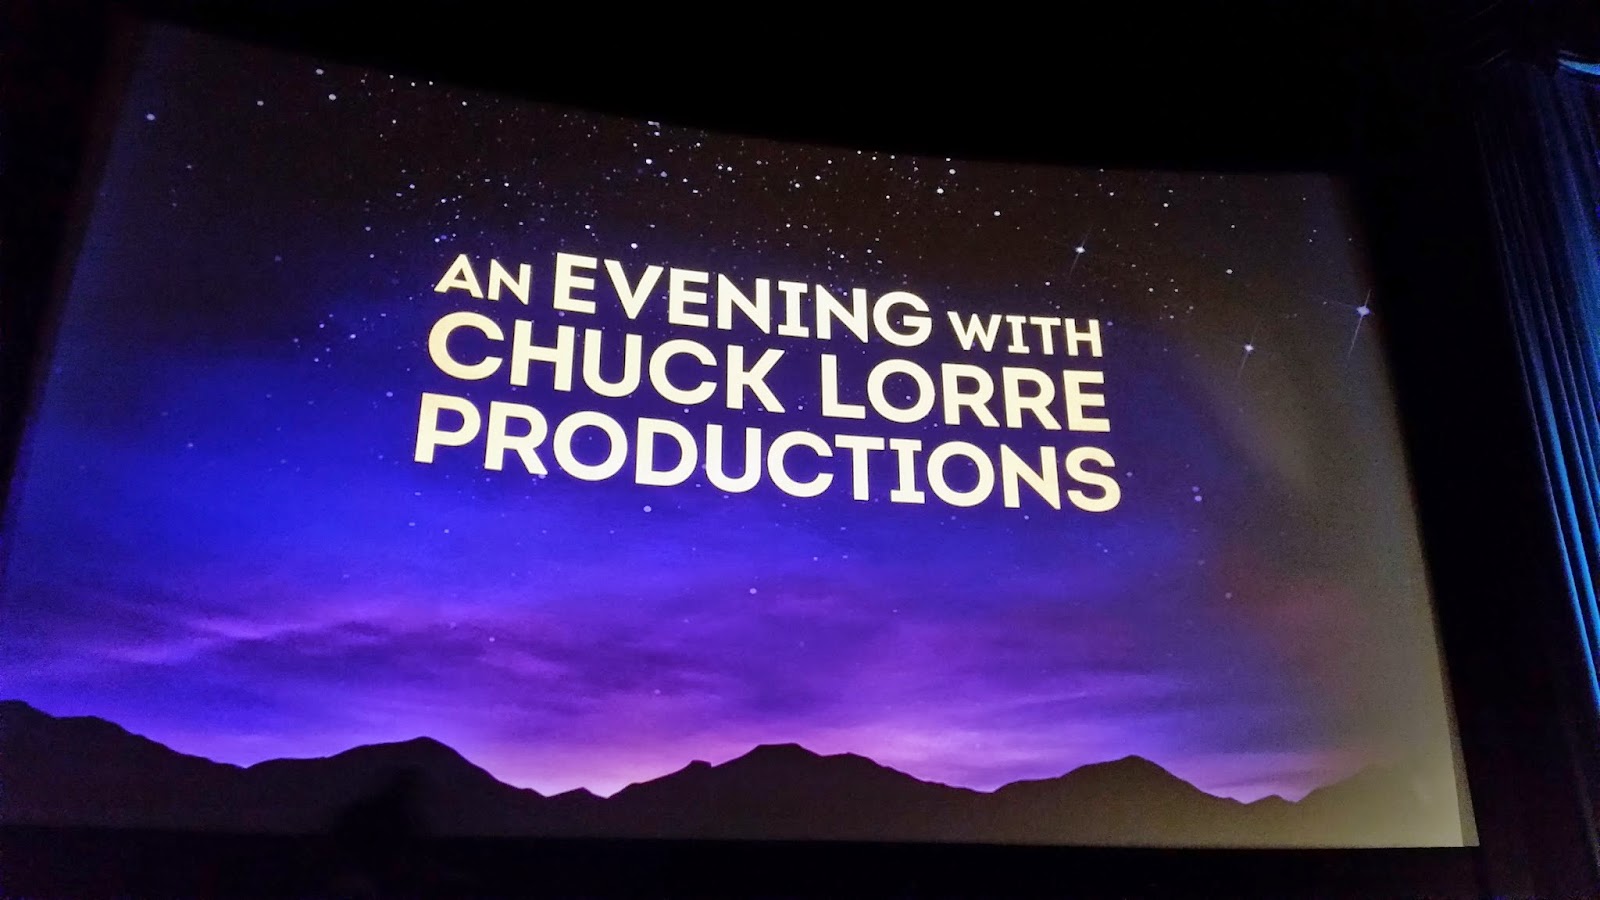 An Evening with Chuck Lorre Productions